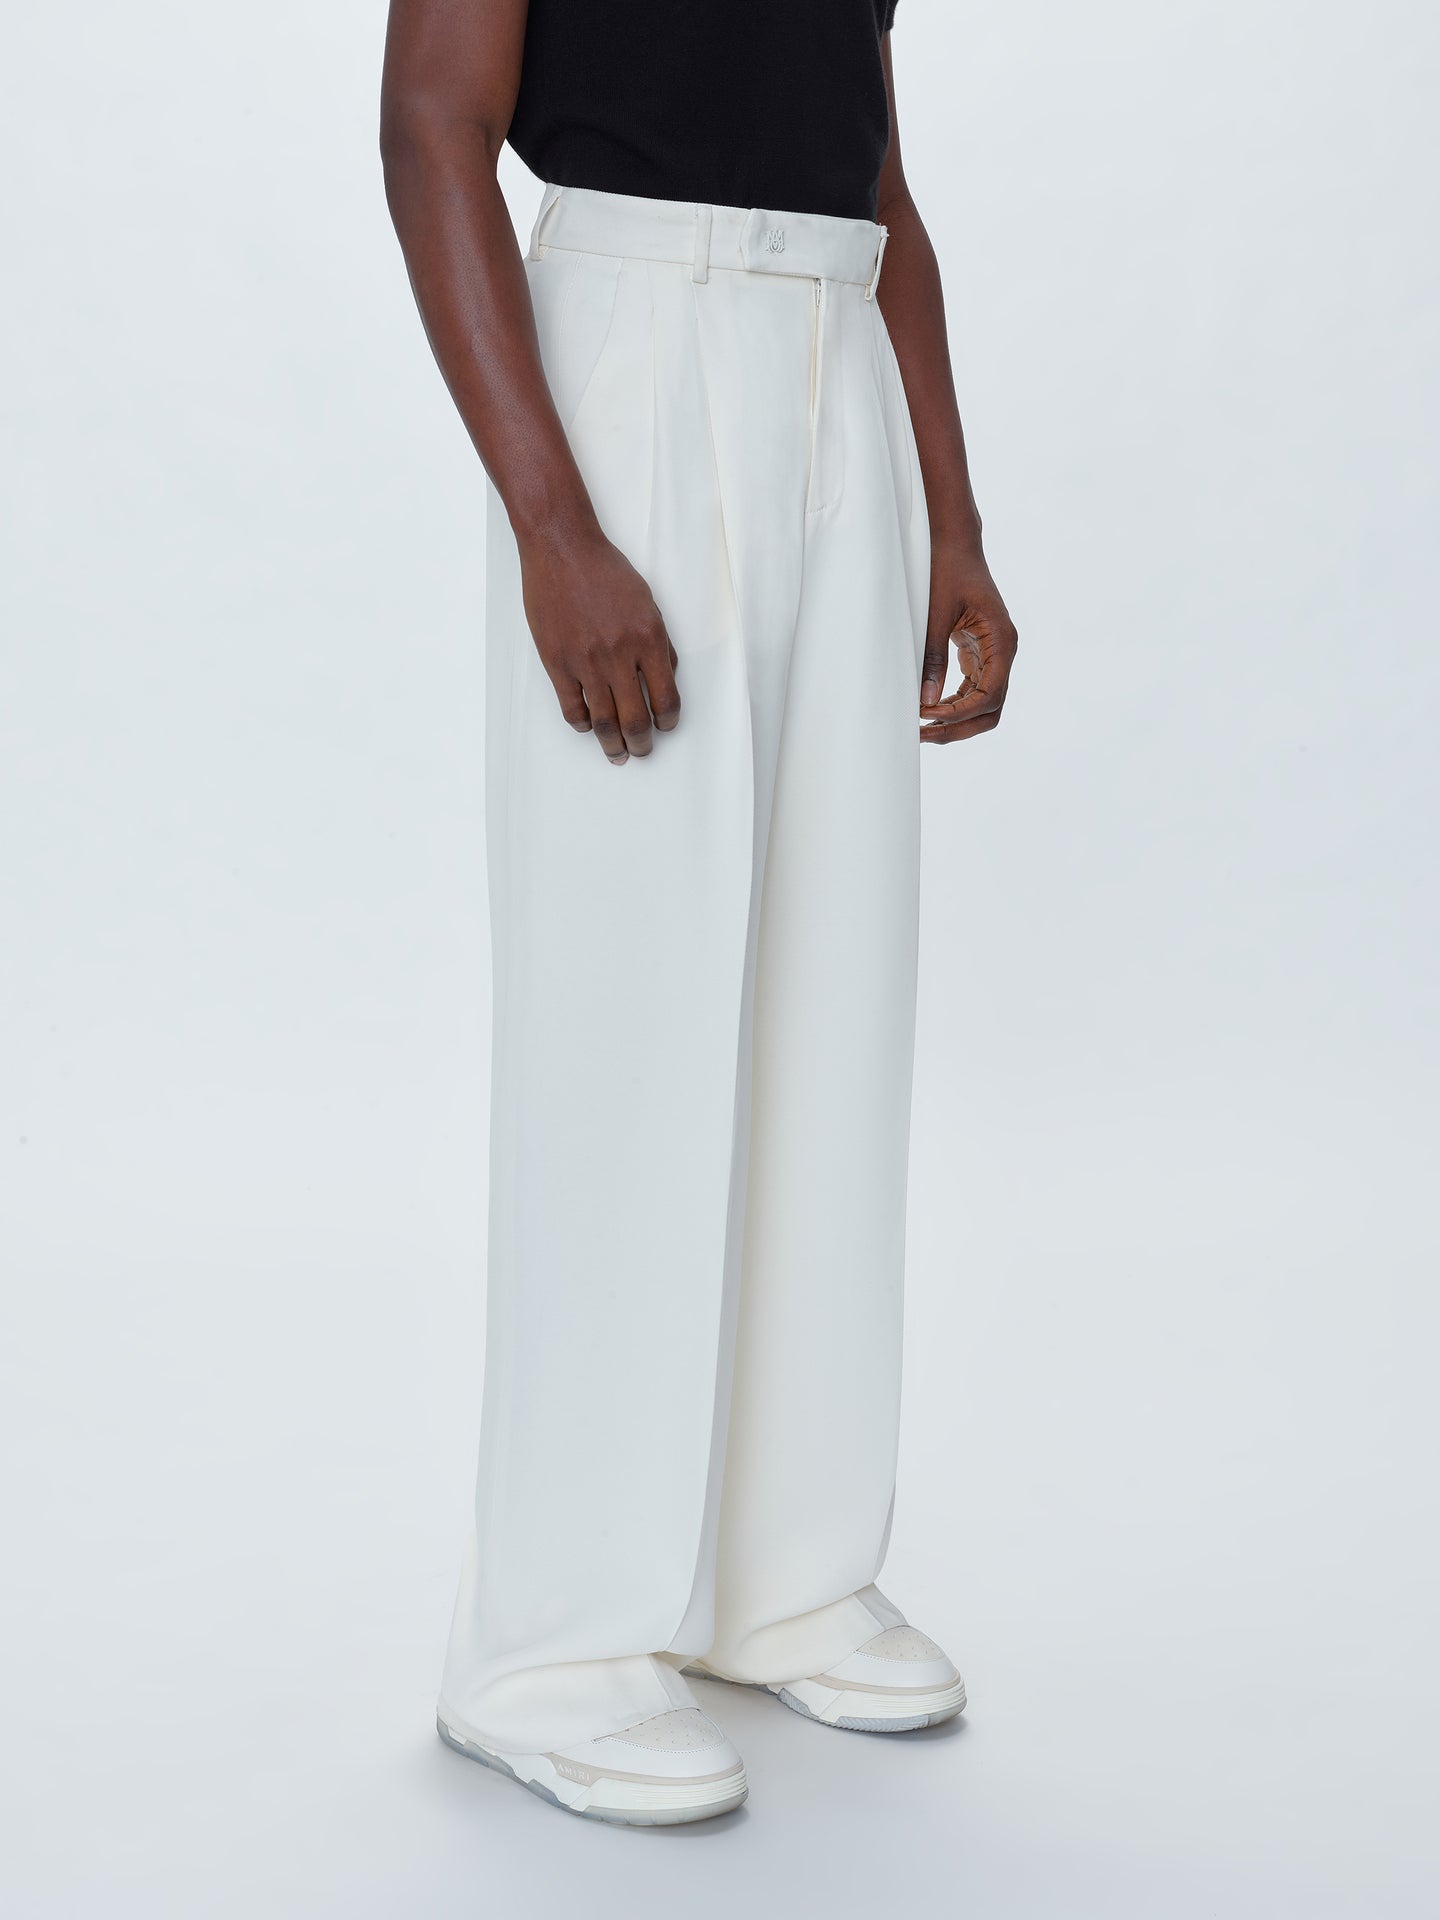 VISCOSE DOUBLE PLEATED TROUSERS - WHITE